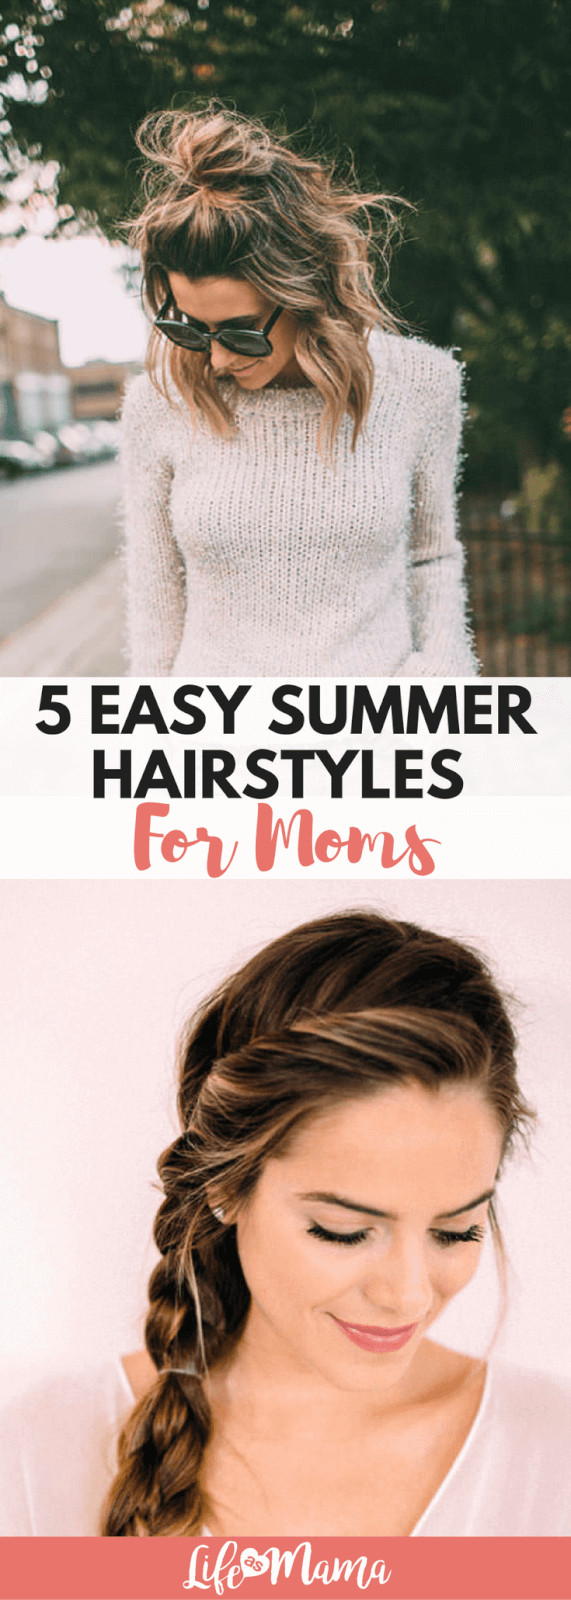 Easy Hairstyles For Moms
 5 Easy Summer Hairstyles For Moms